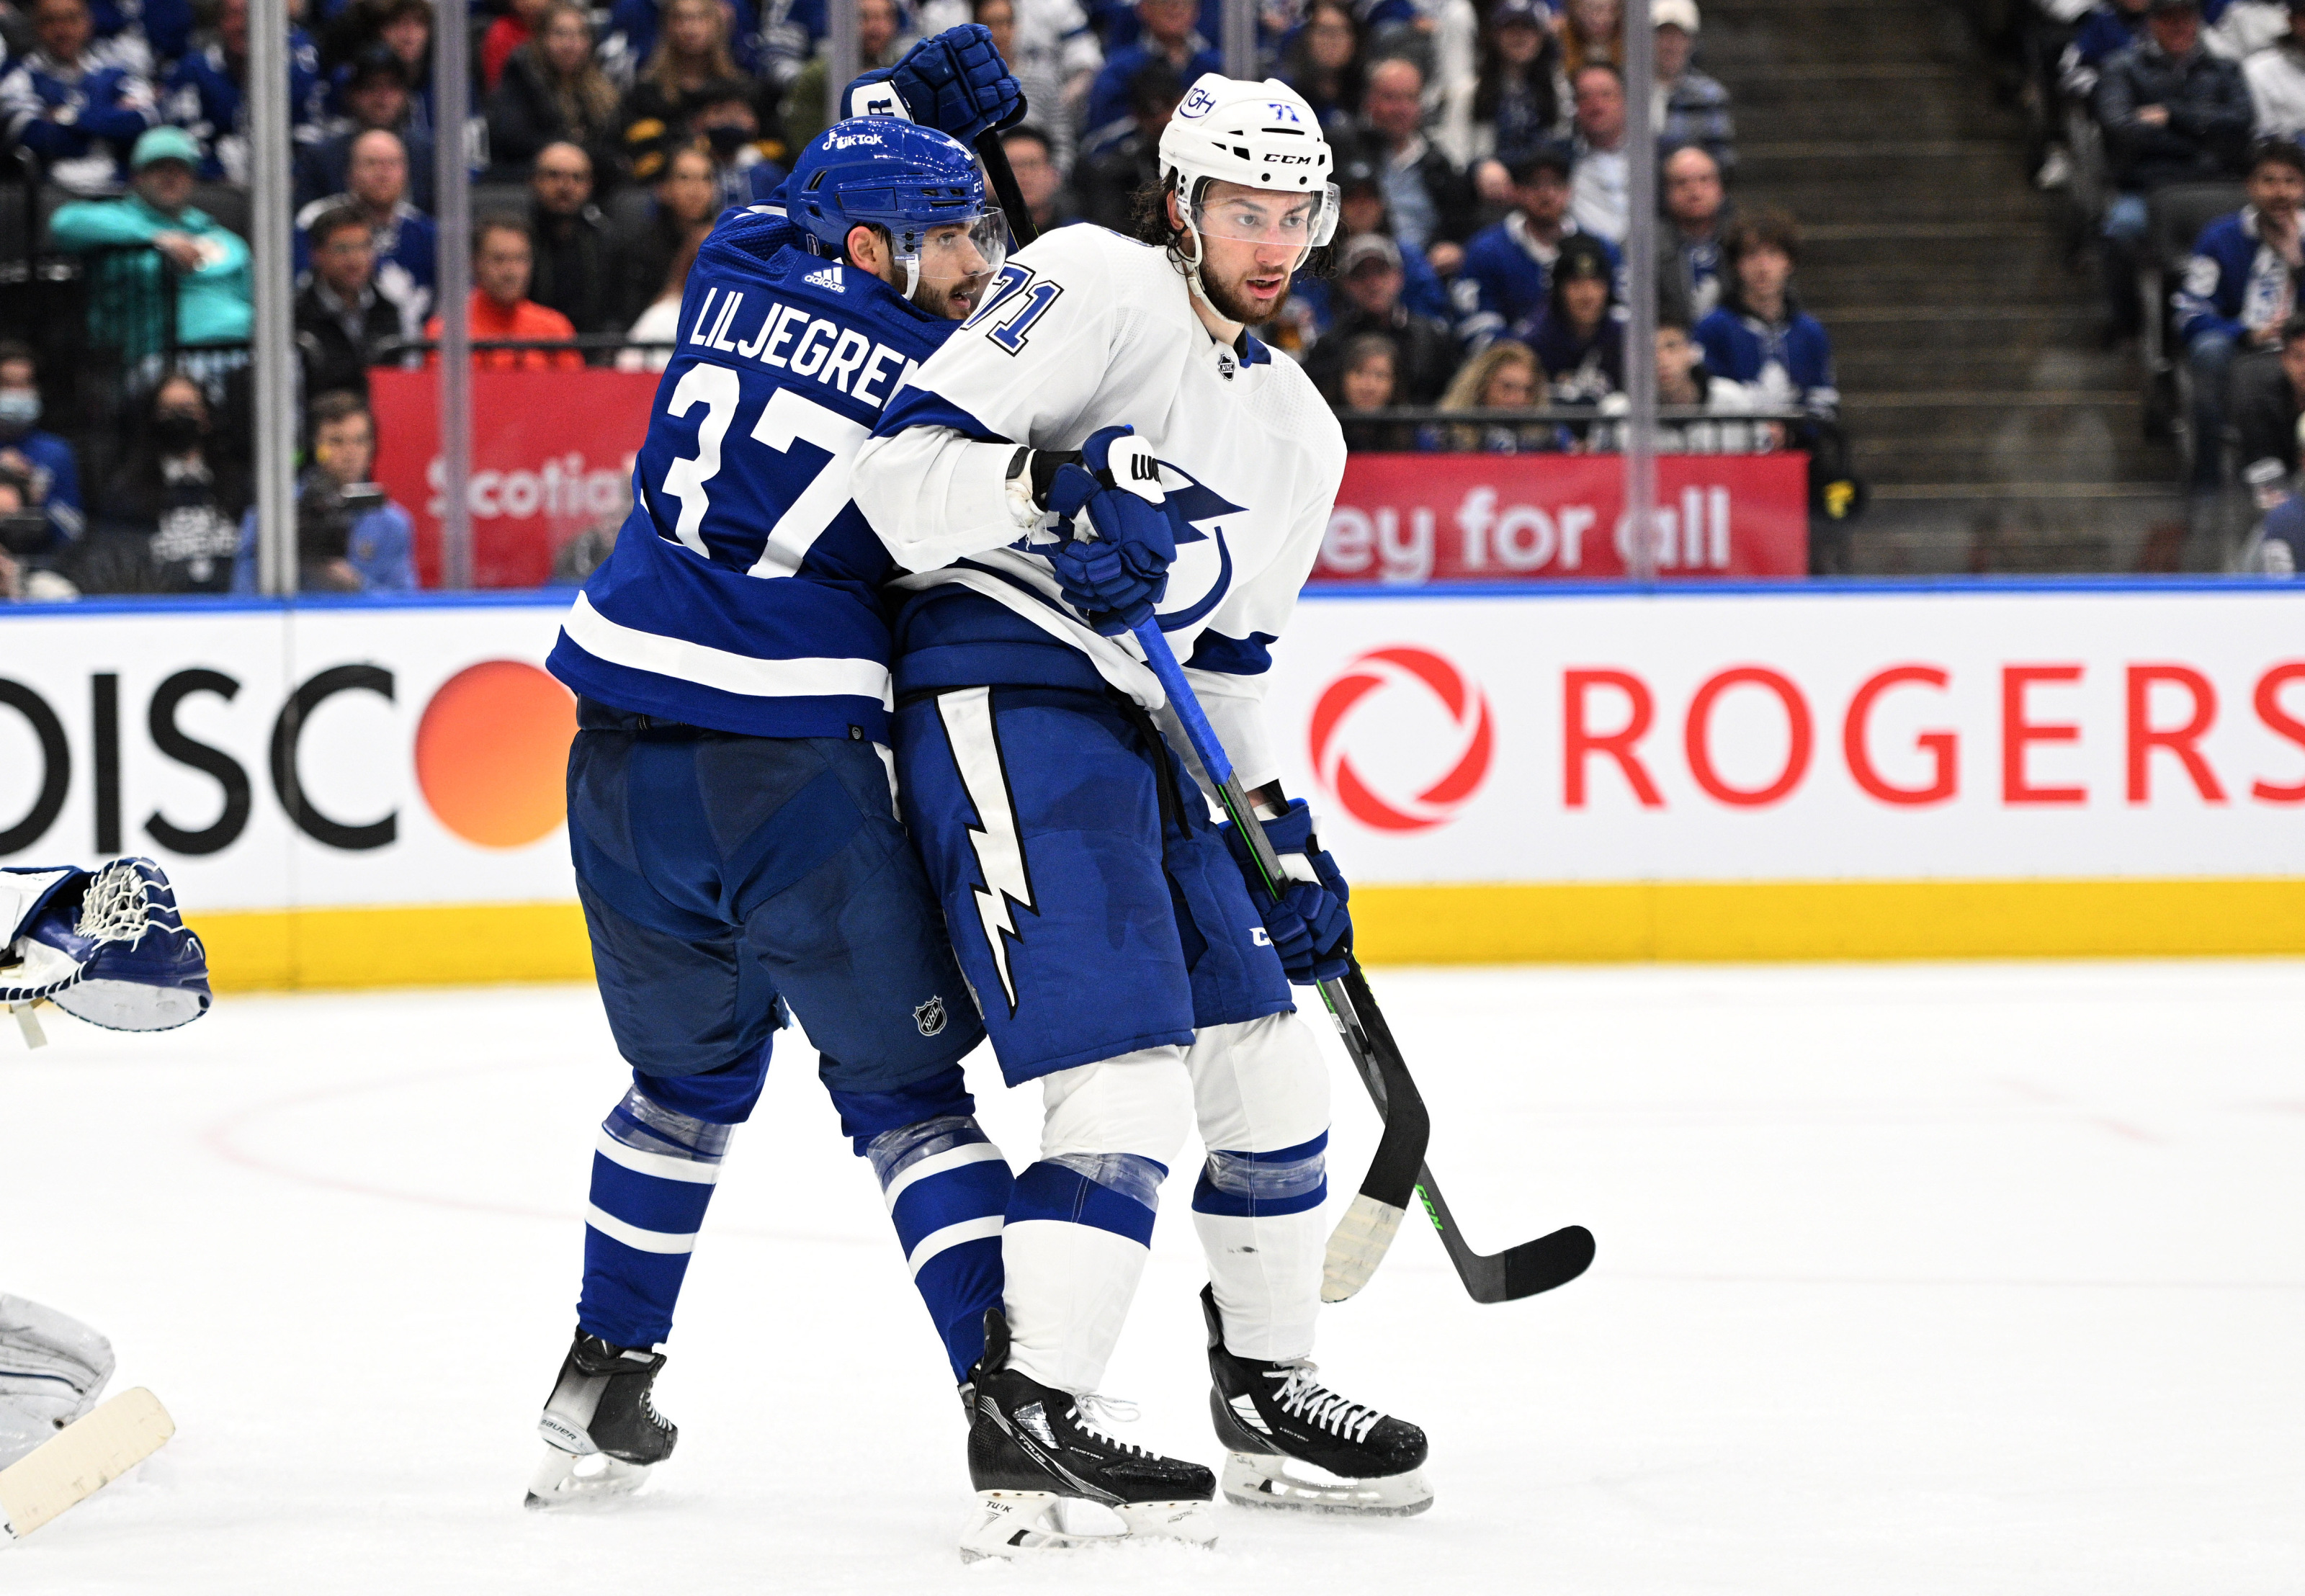 Toronto Maple Leafs: Timothy Liljegren's path to the NHL